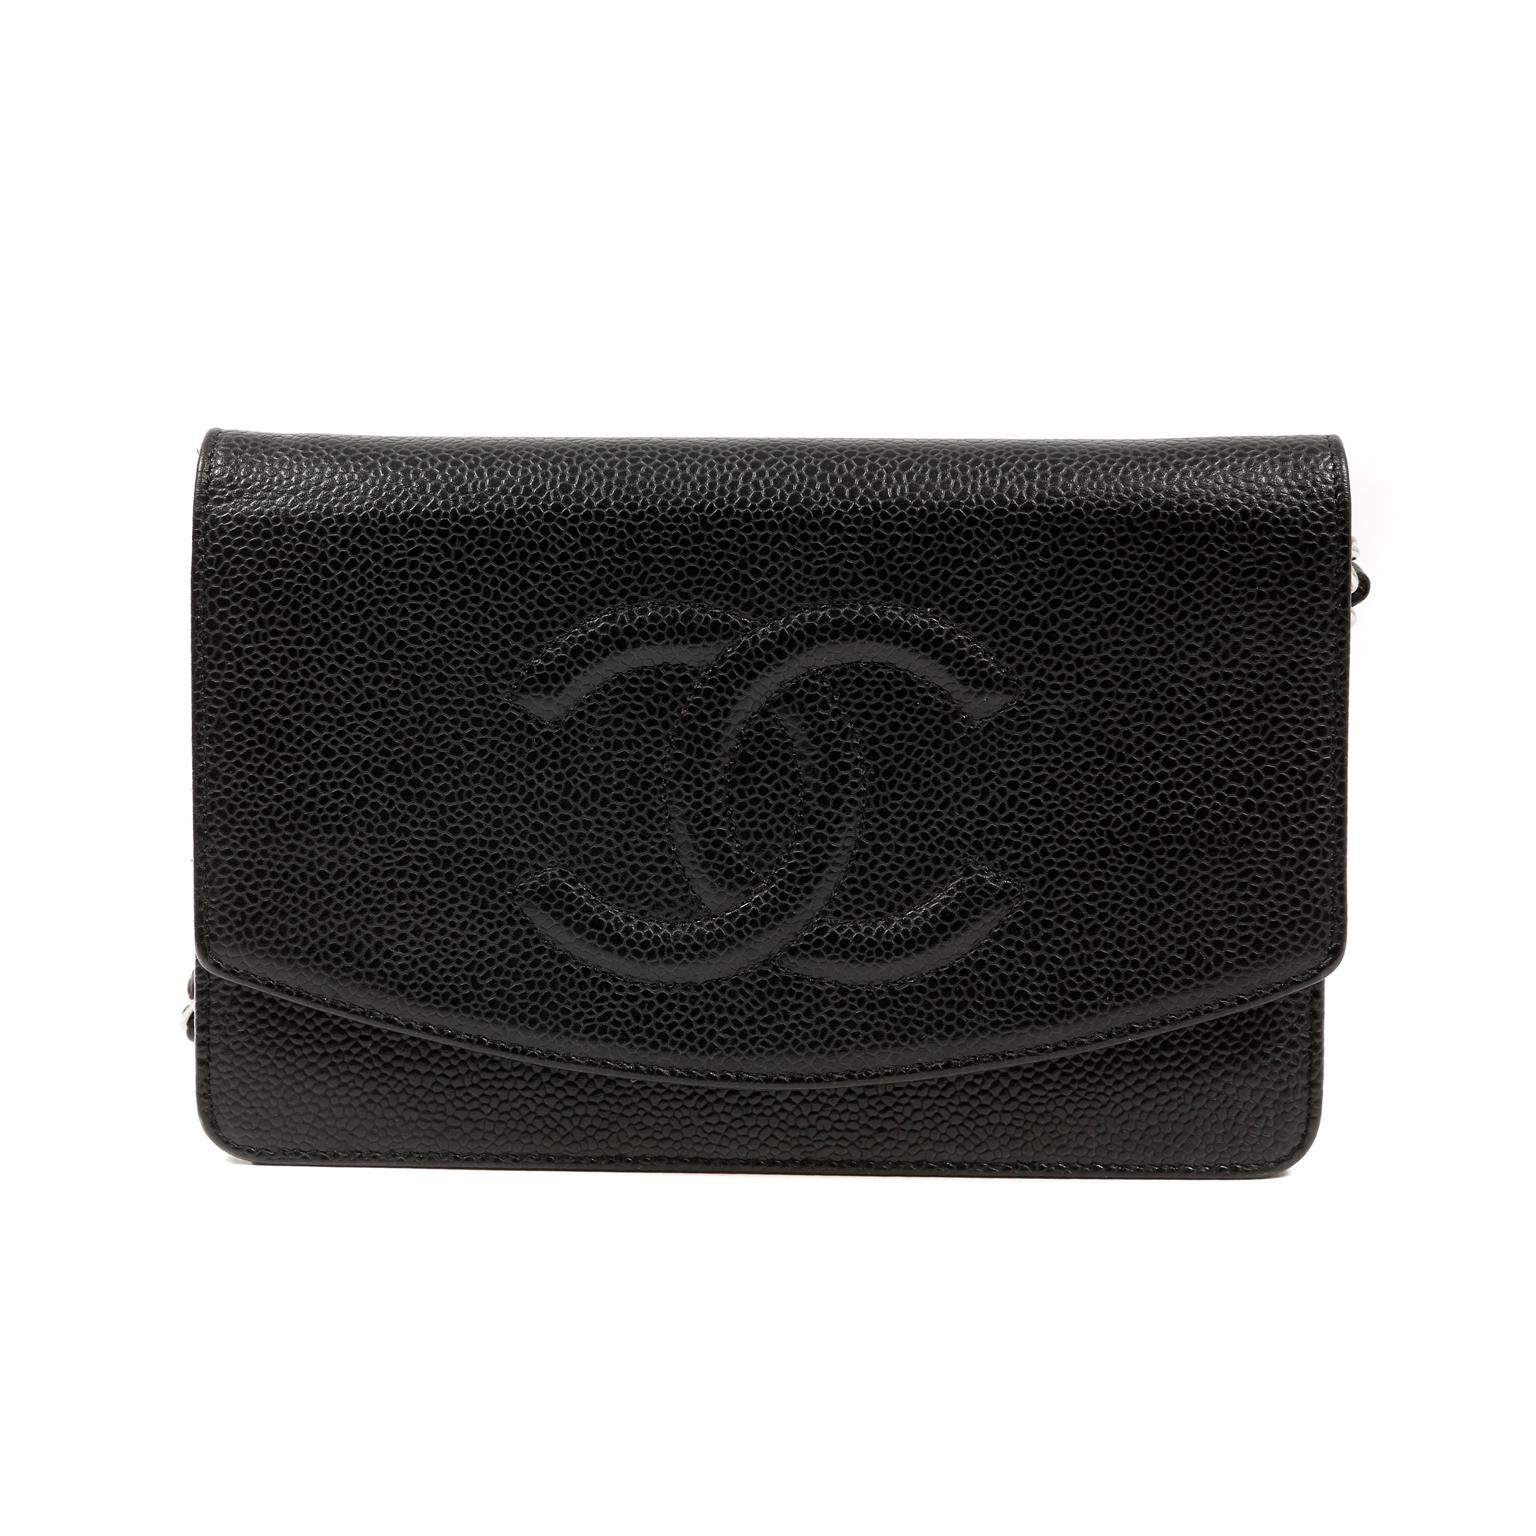 Chanel Black Caviar Timeless Wallet on a Chain with Silver 1